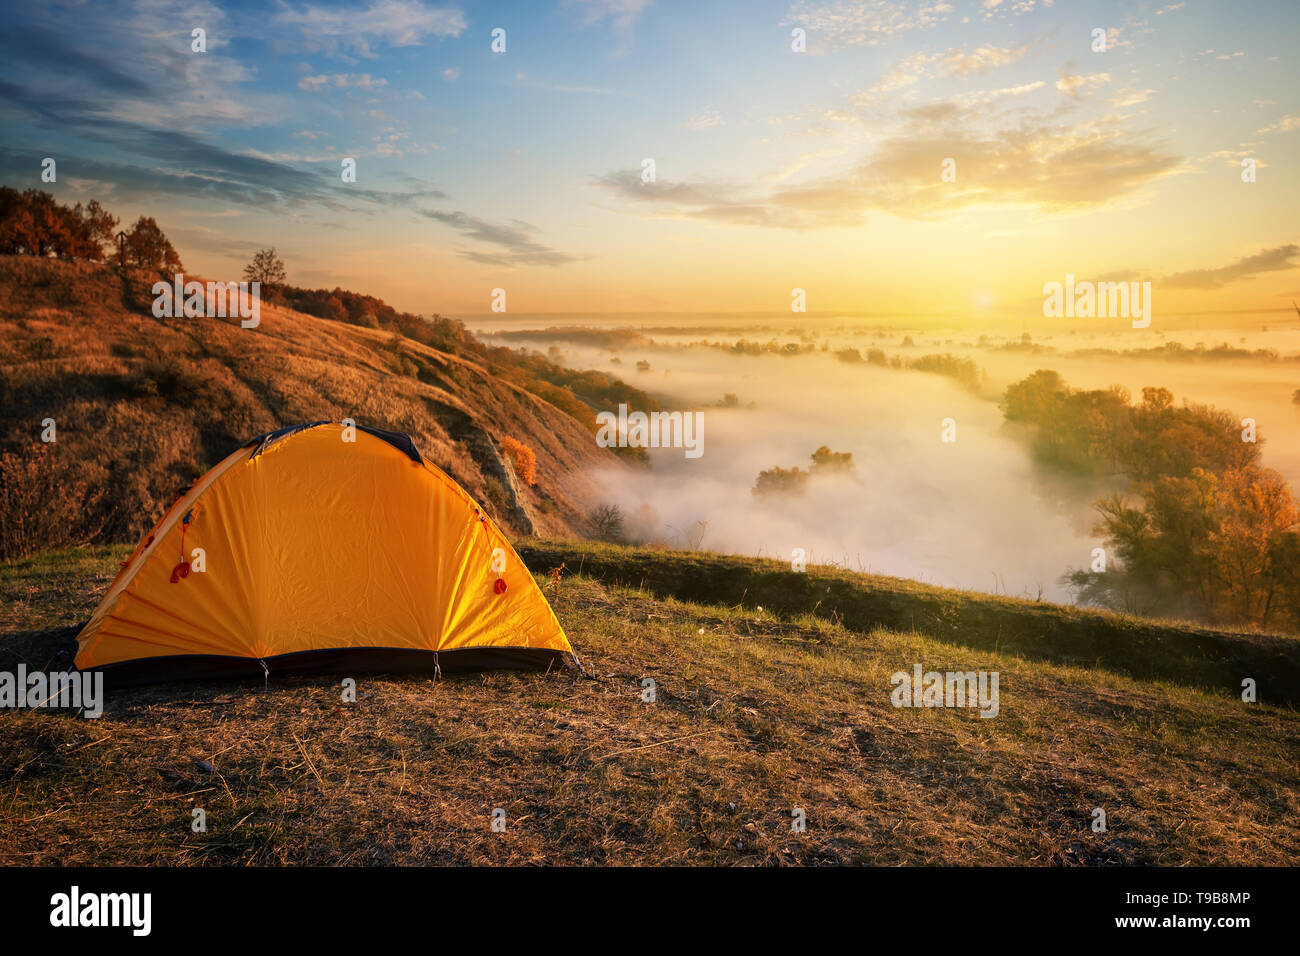 Orange tent in canyon over misty river at sunset Stock Photo